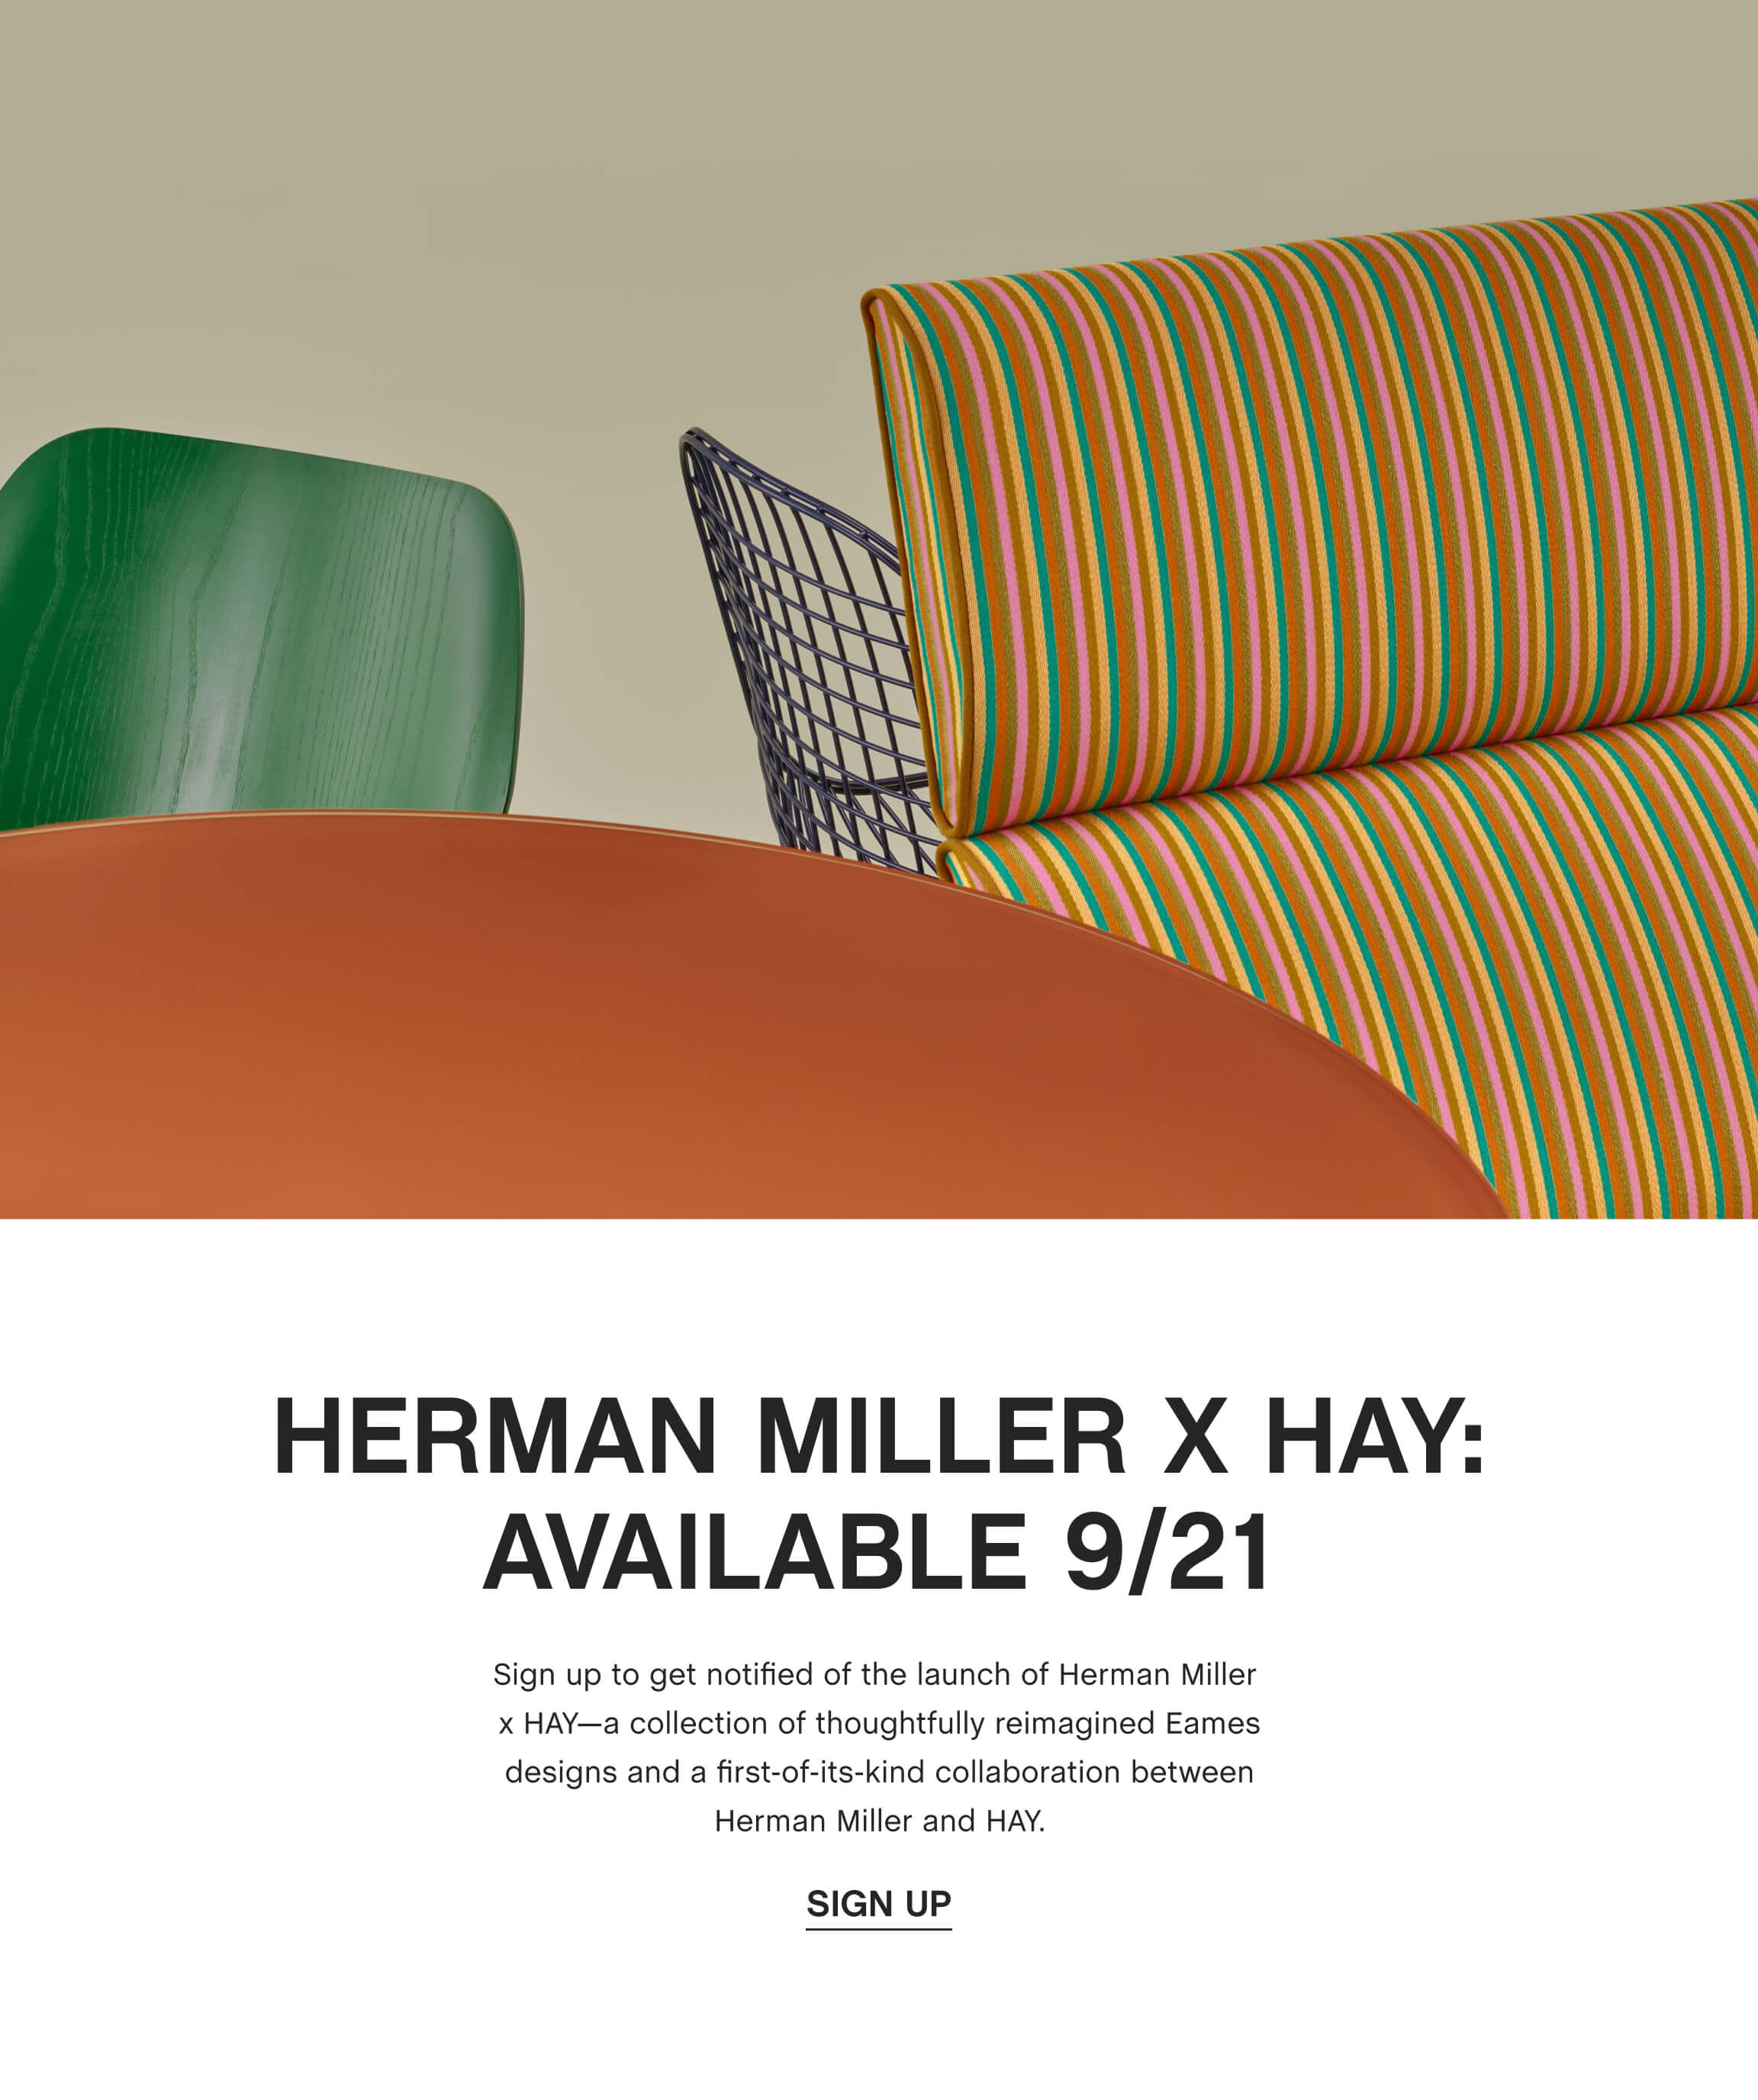 Sign up to get notified of the launch of Herman Miller x HAY